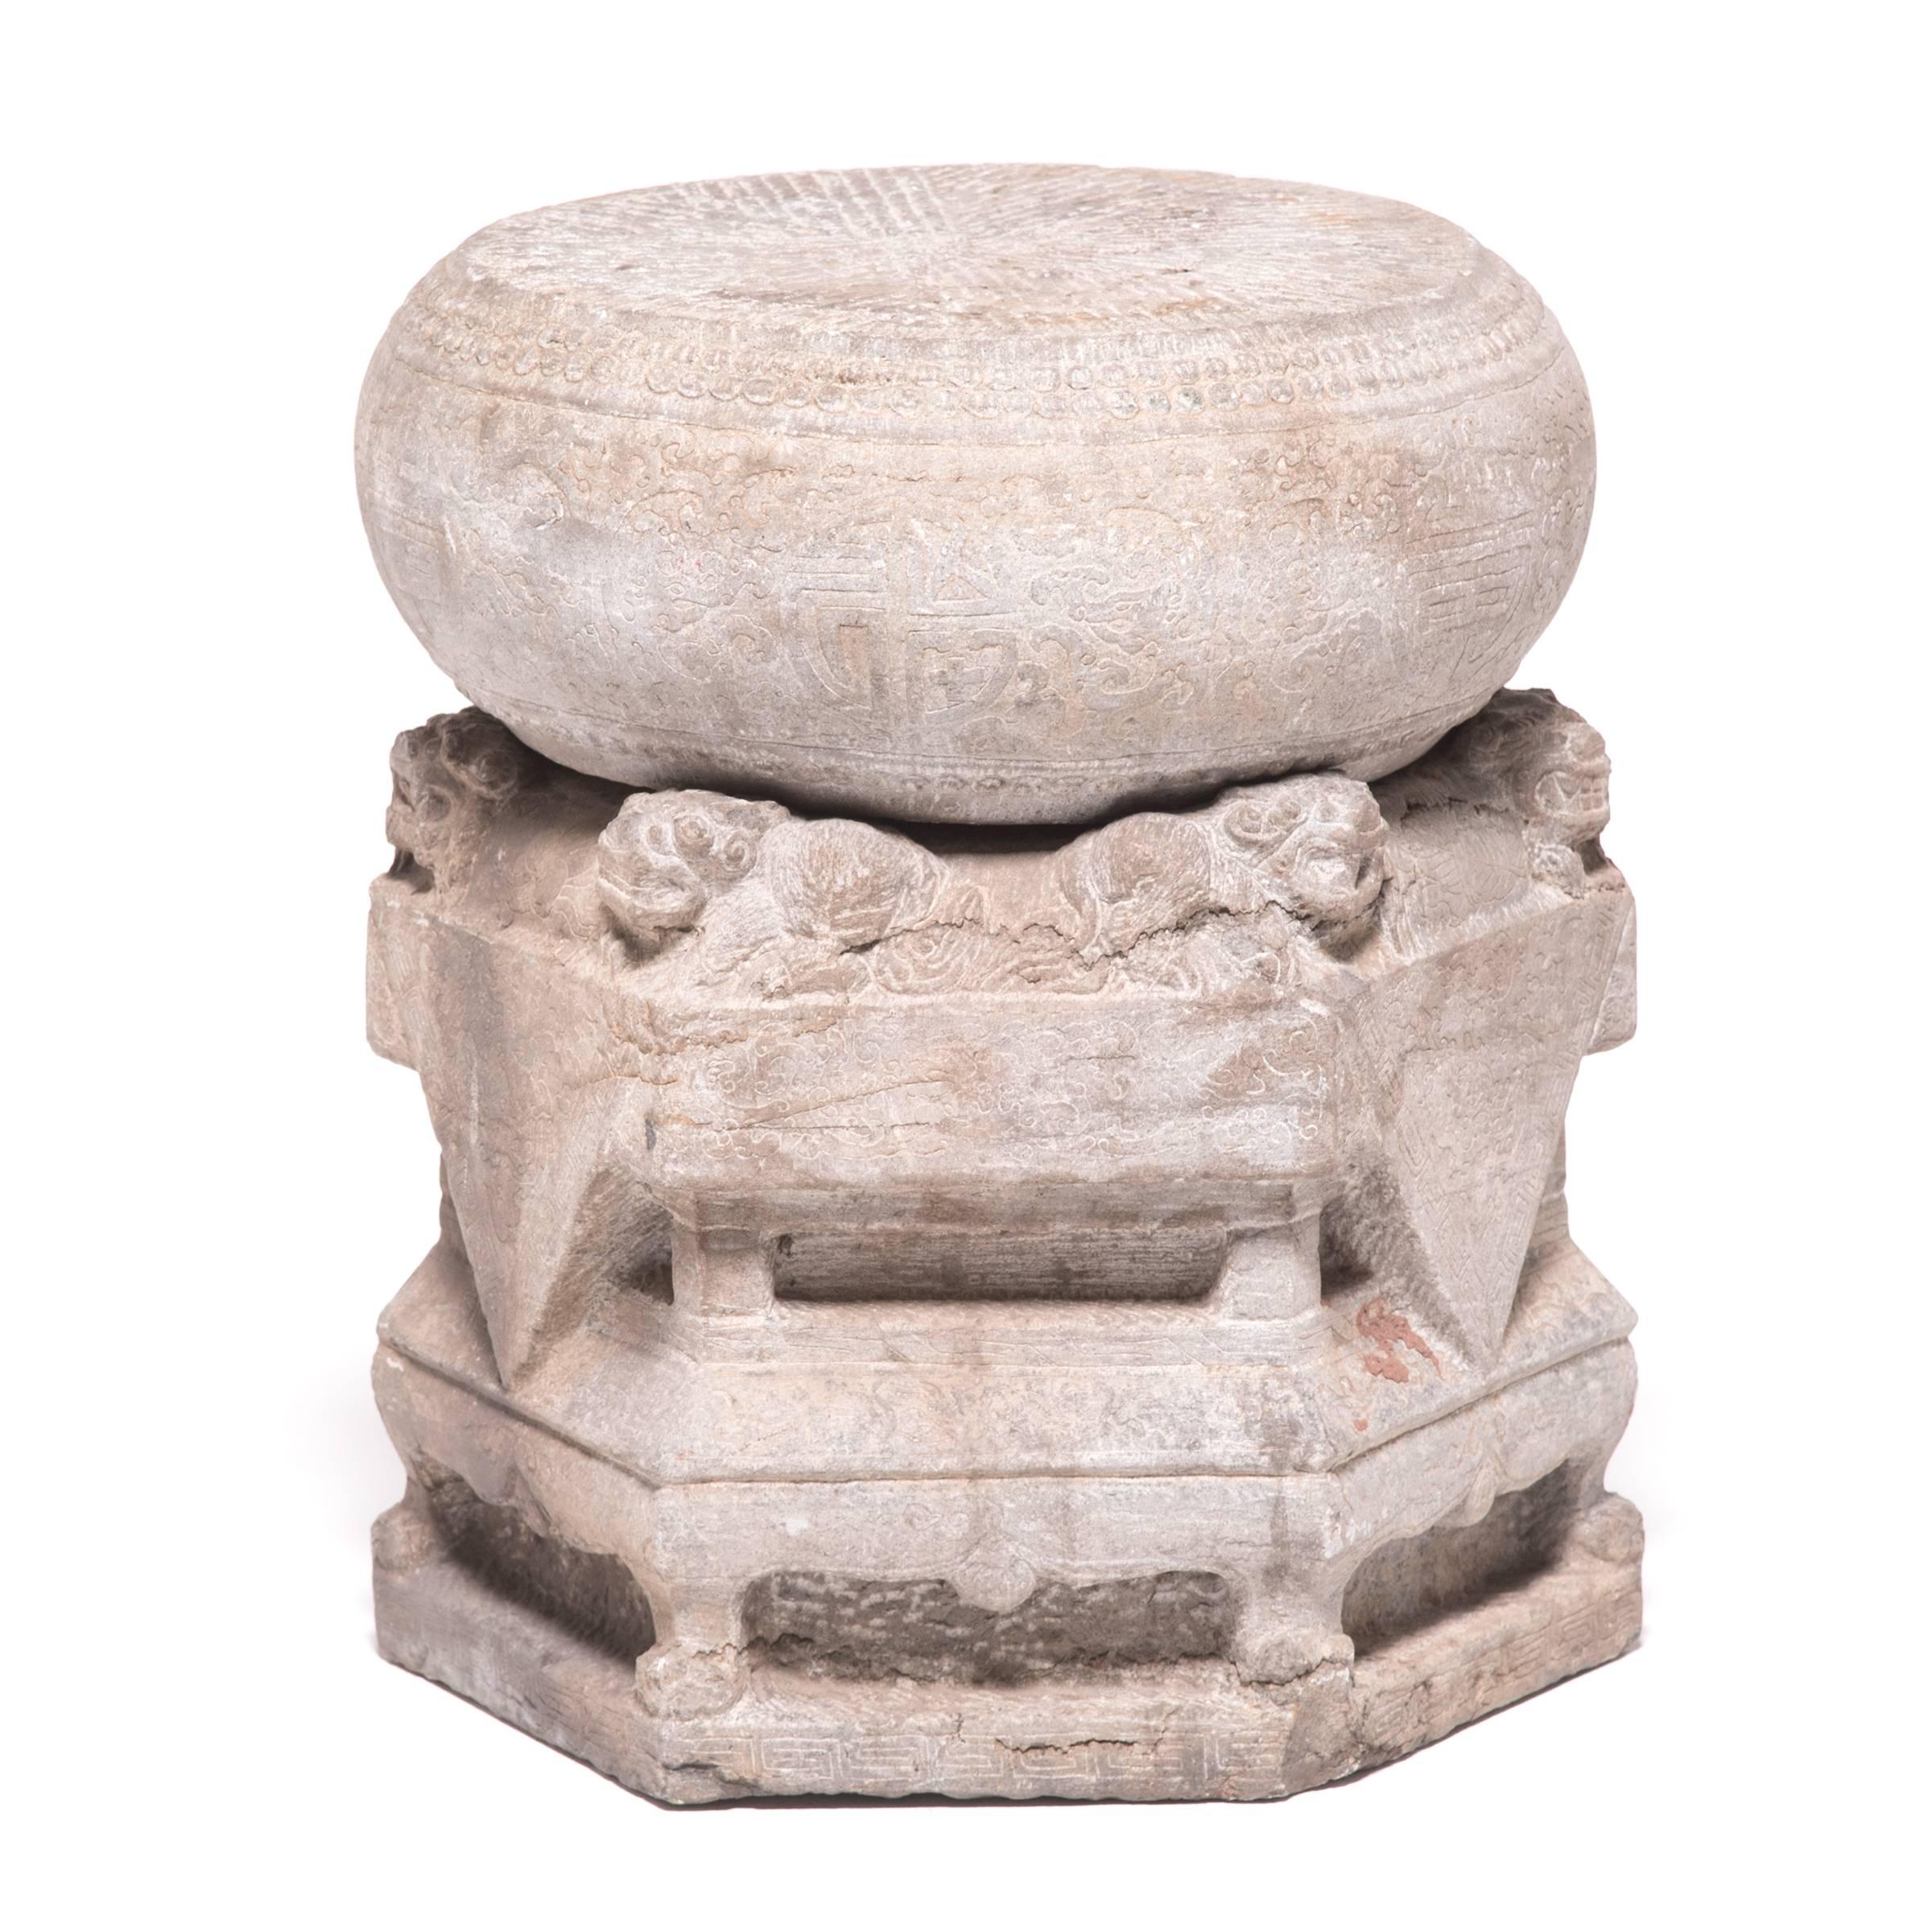 These 19th century column supports likely figured into the grand and imposing surroundings of a Qing-dynasty courtyard, flanking the entryway with its protective presence. Carved from limestone, the columns are composed of two sections: a